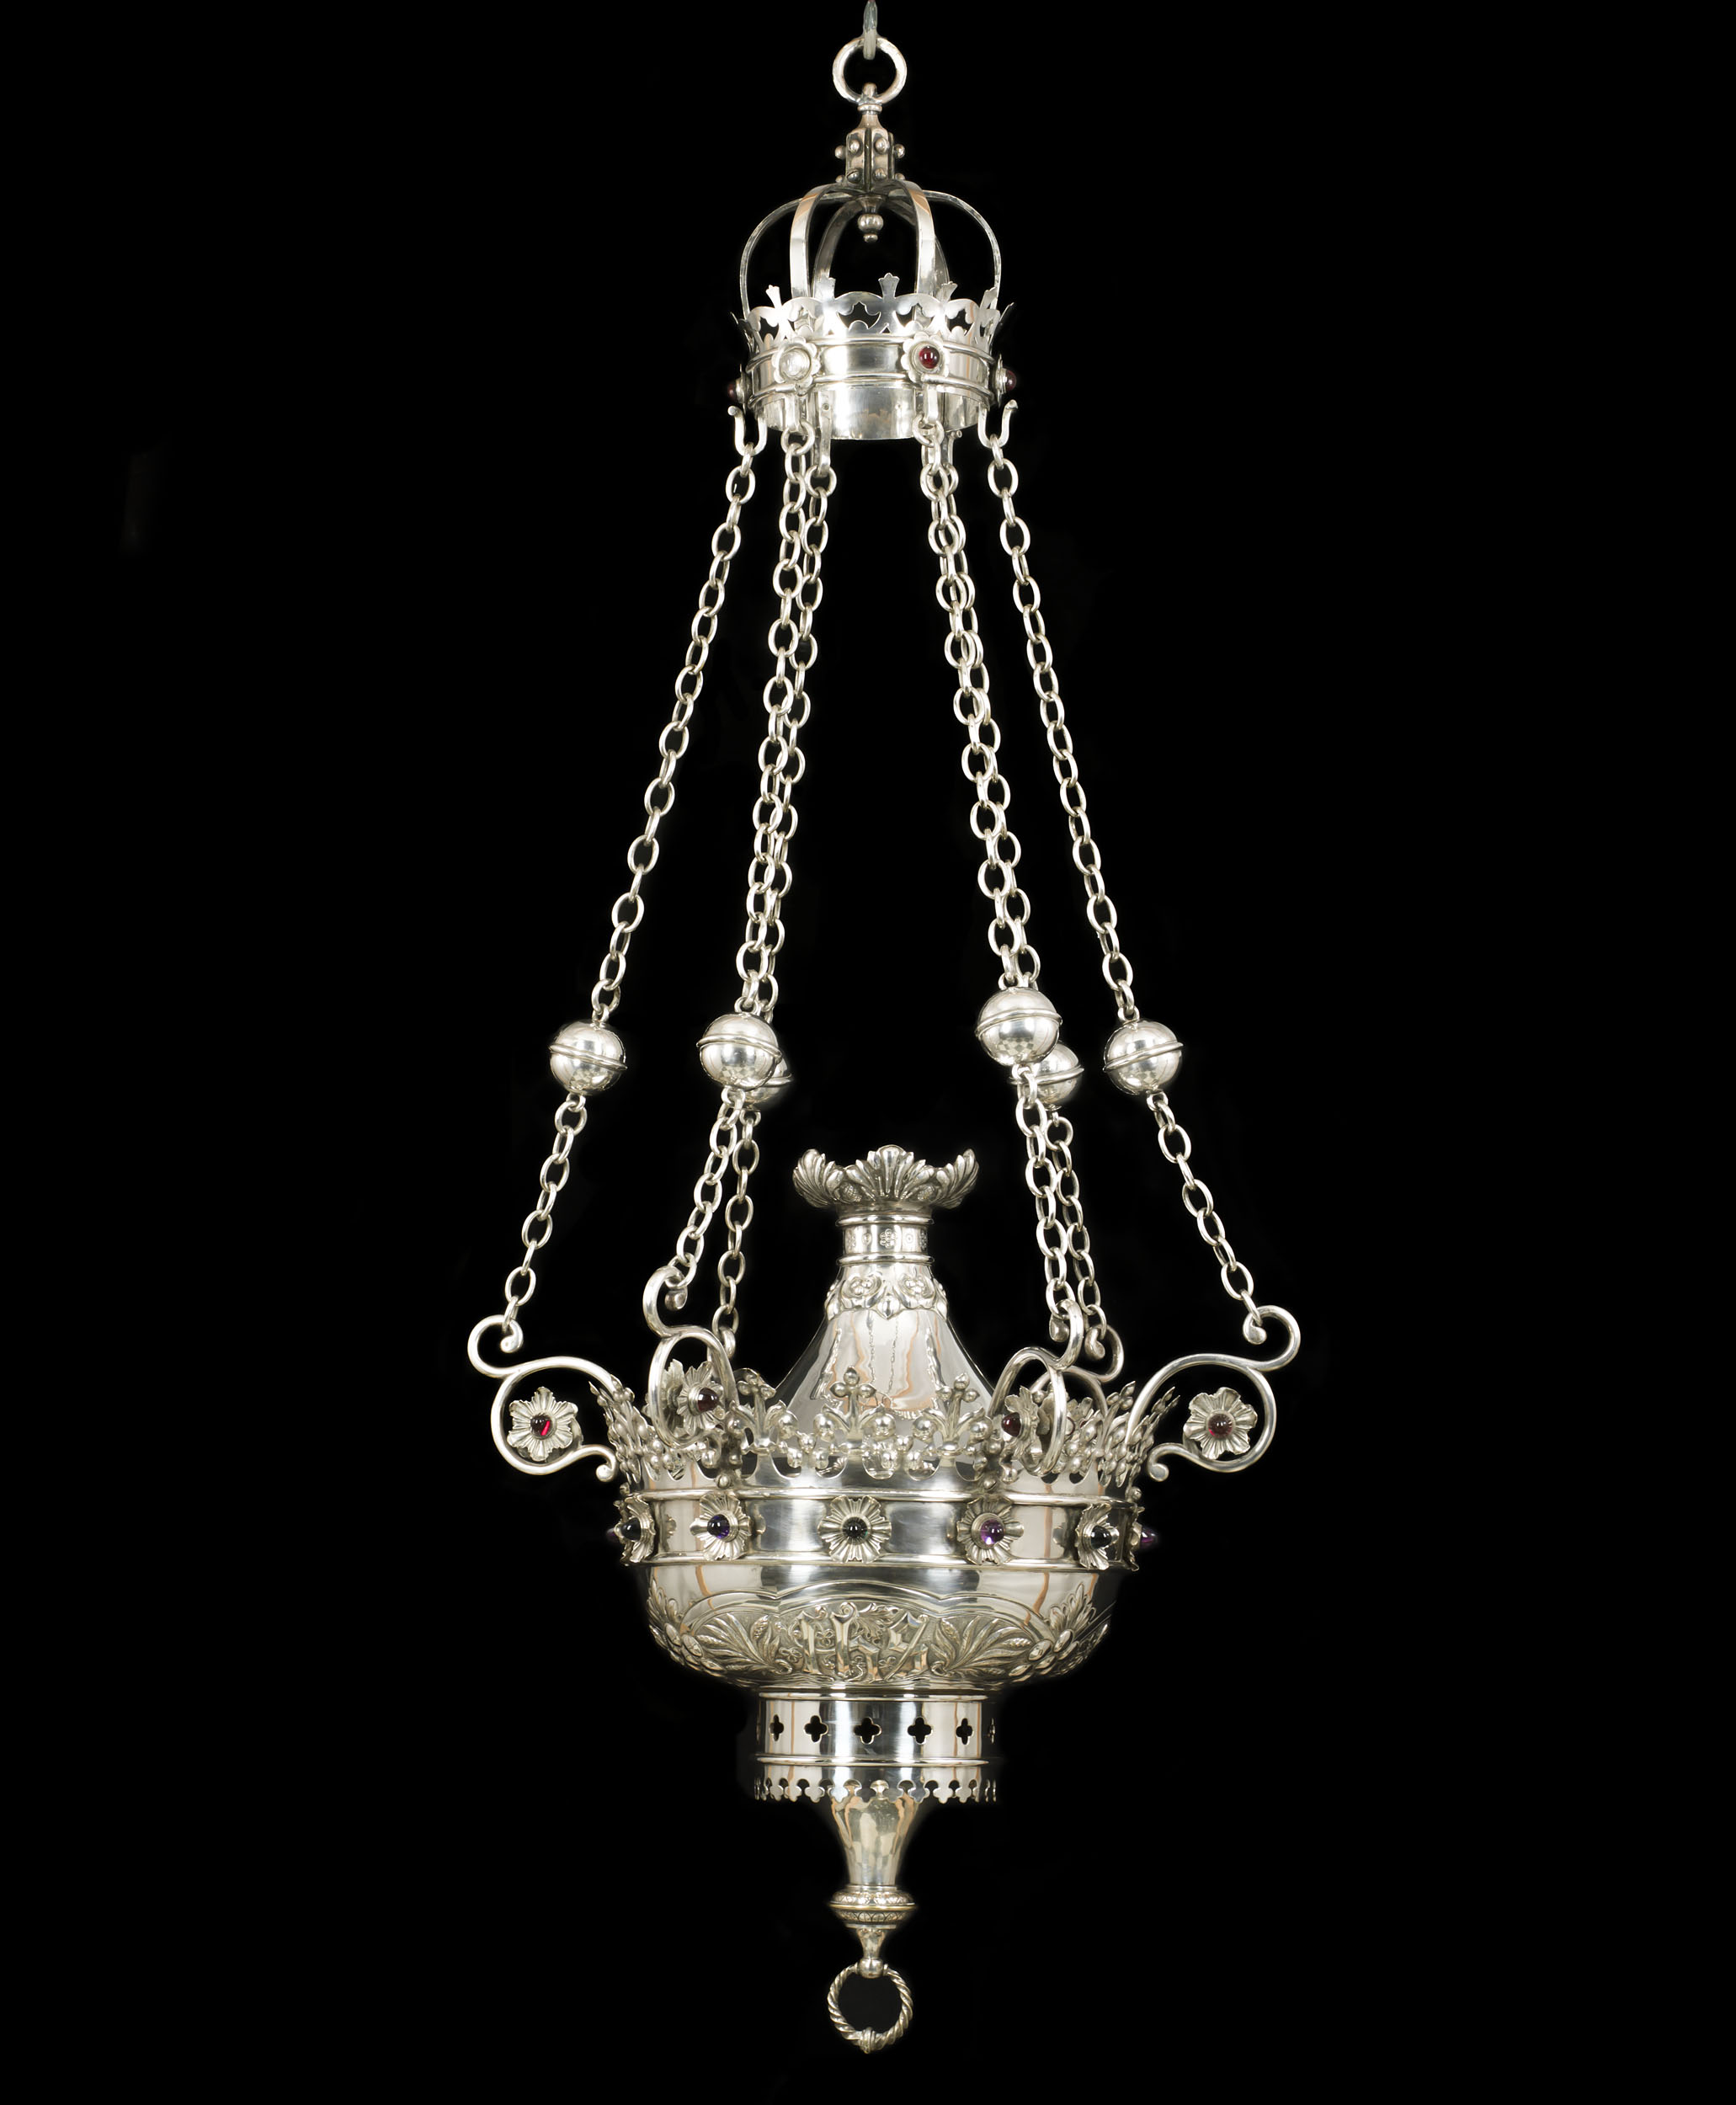 A Gothic Revival Silver Plated Incense Burner